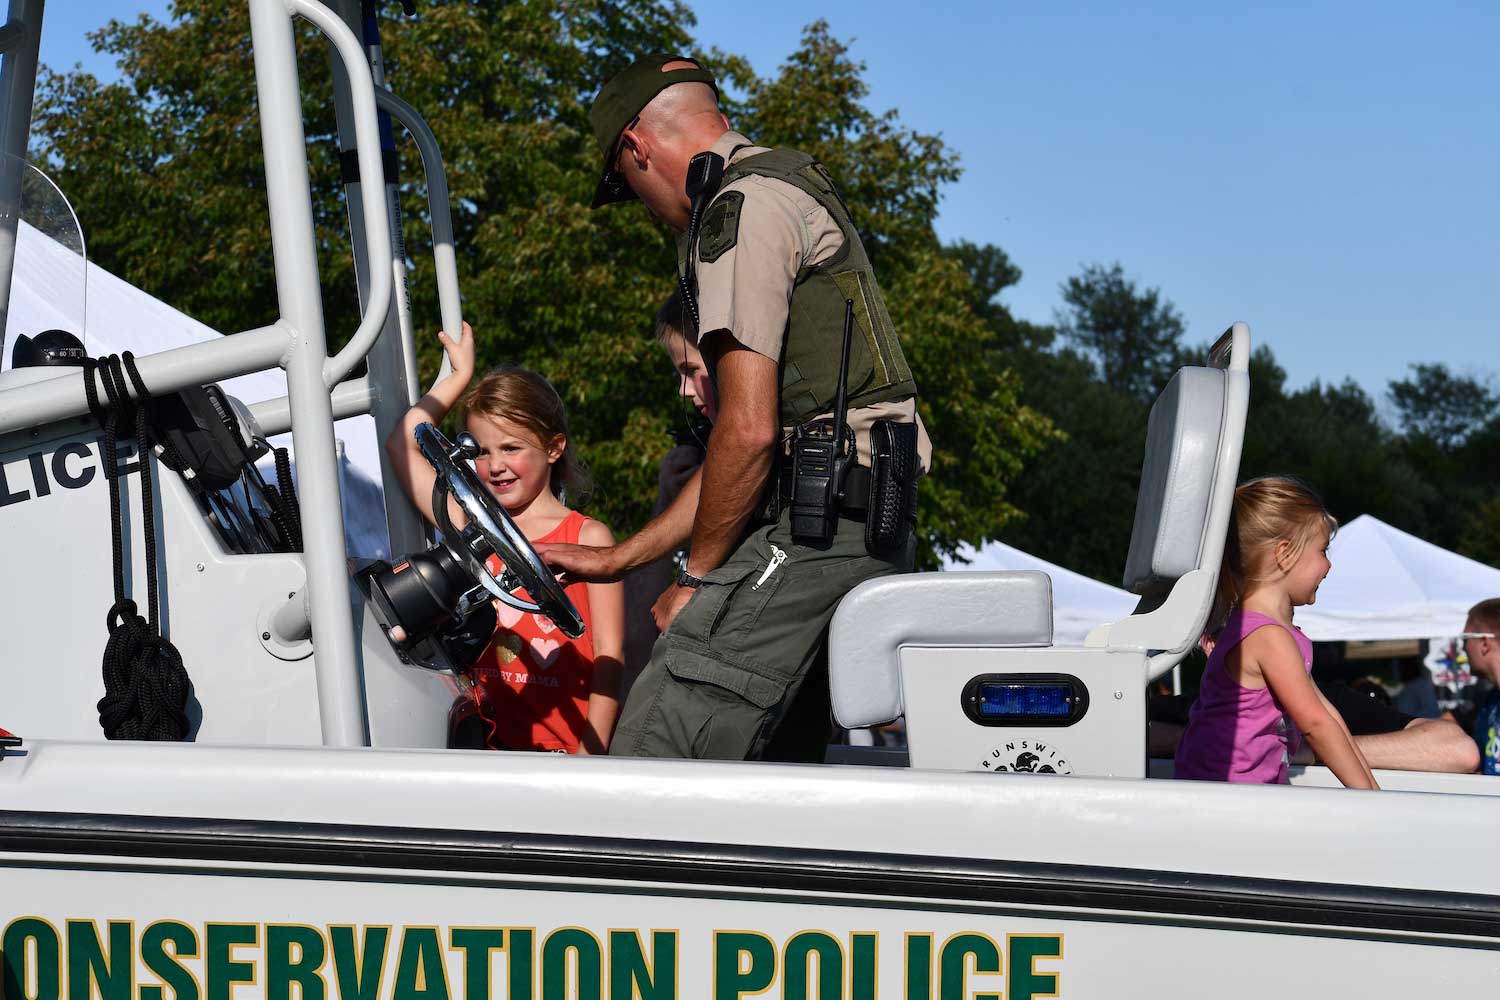 A conservation police officer showing kids a police boat.